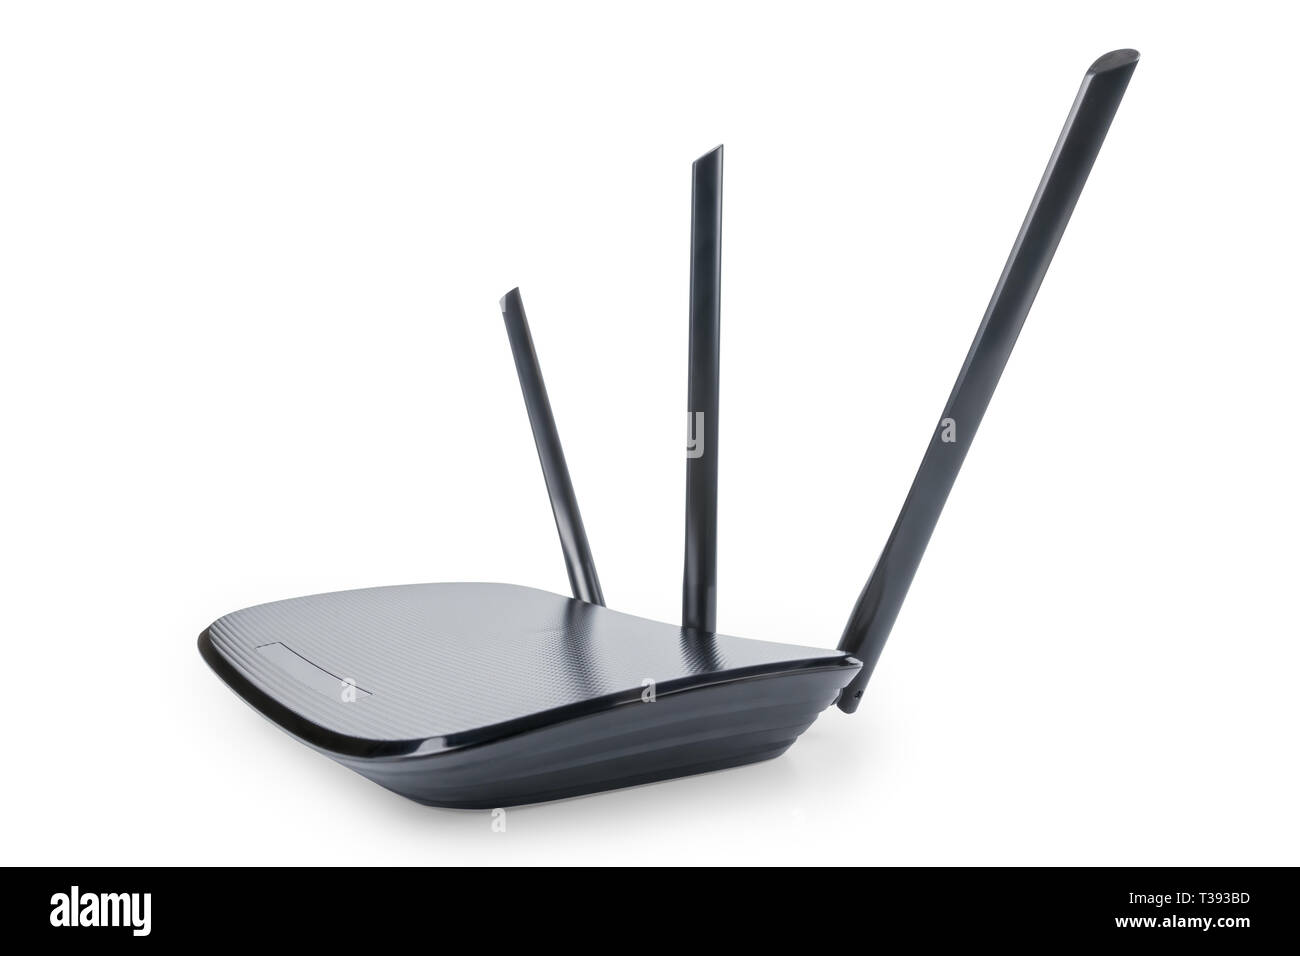 Black wifi router in wide angle perspective. Isolated on white, clipping path included Stock Photo